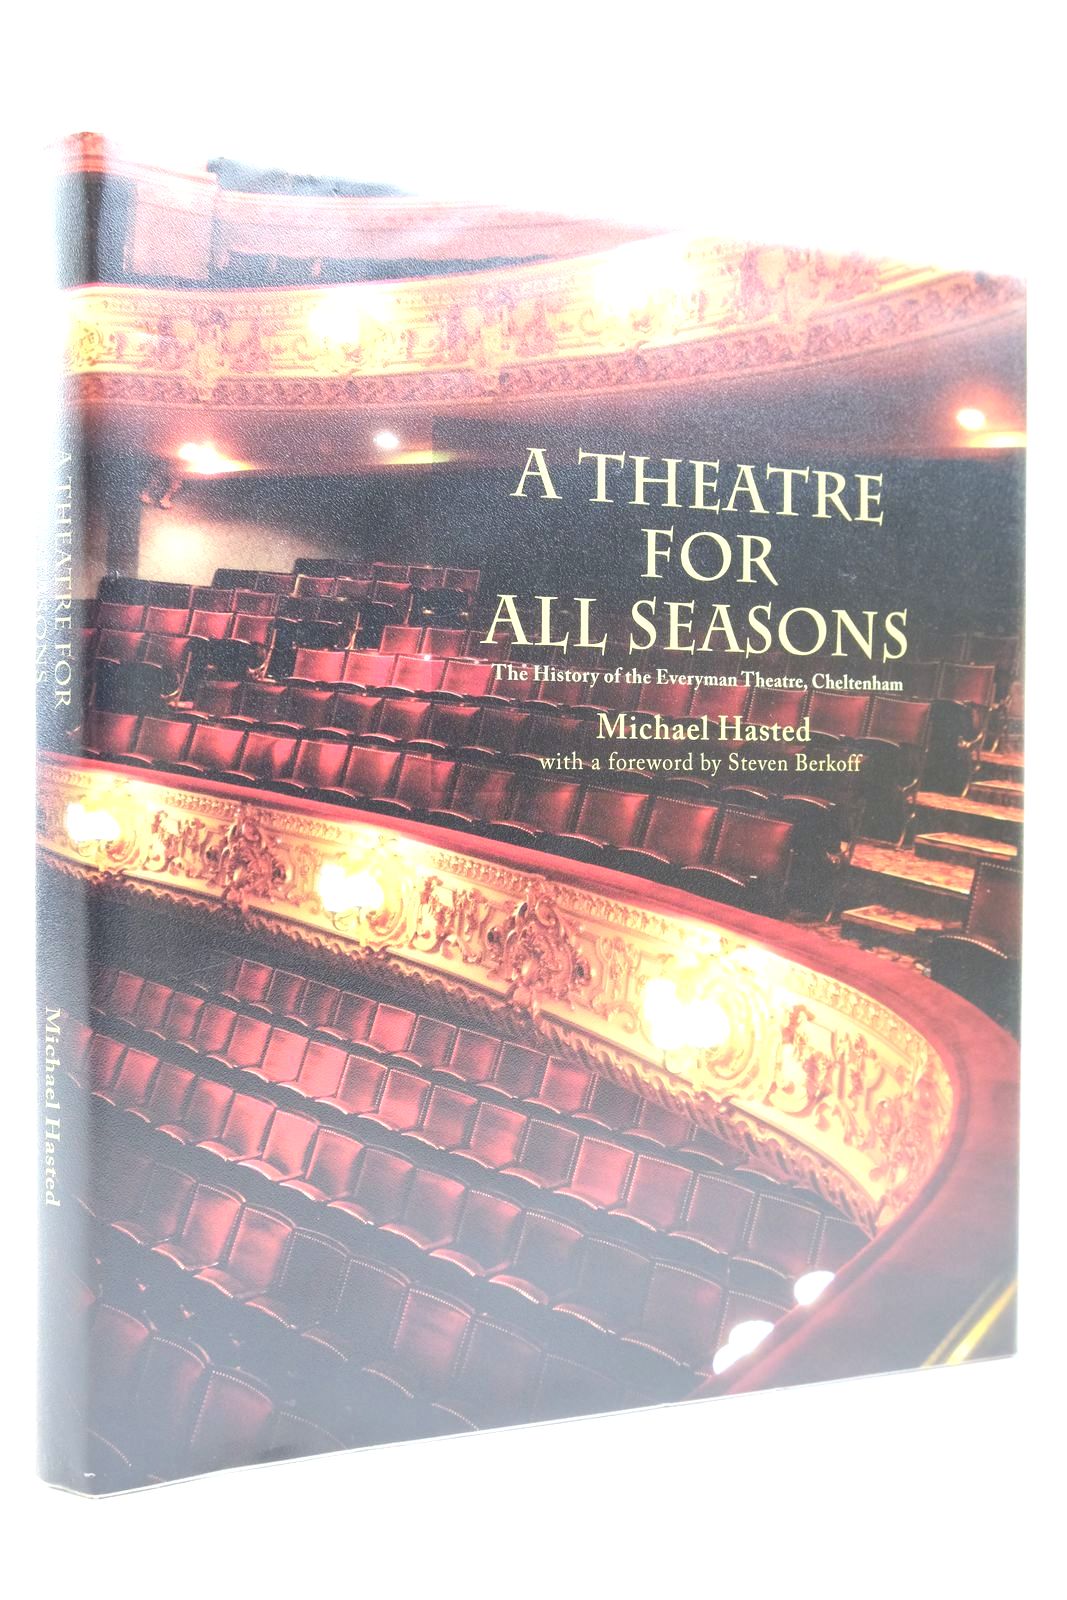 Photo of A THEATRE FOR ALL SEASONS written by Hasted, Michael published by Northern Arts Publications (STOCK CODE: 2140790)  for sale by Stella & Rose's Books